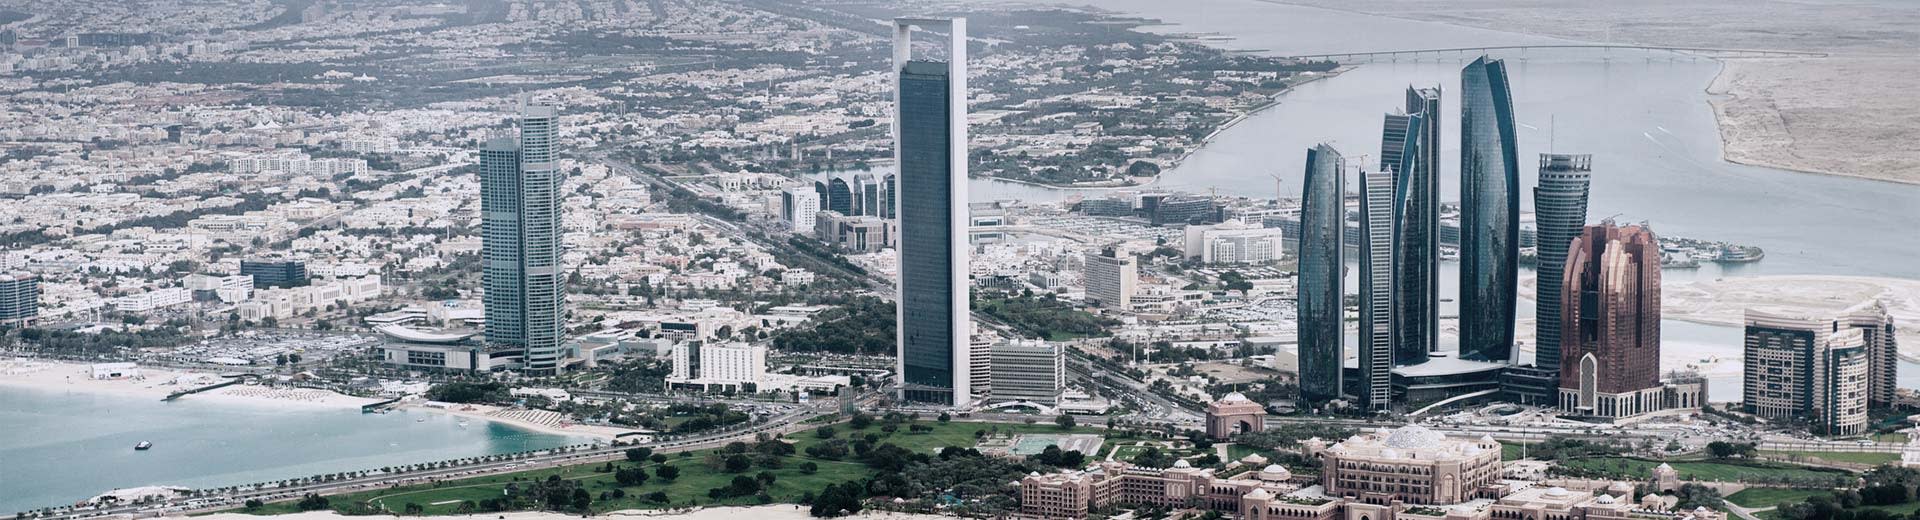 Panorama of Abu Dhabi's city center with a clear view of skyscrapers and desert in the background.